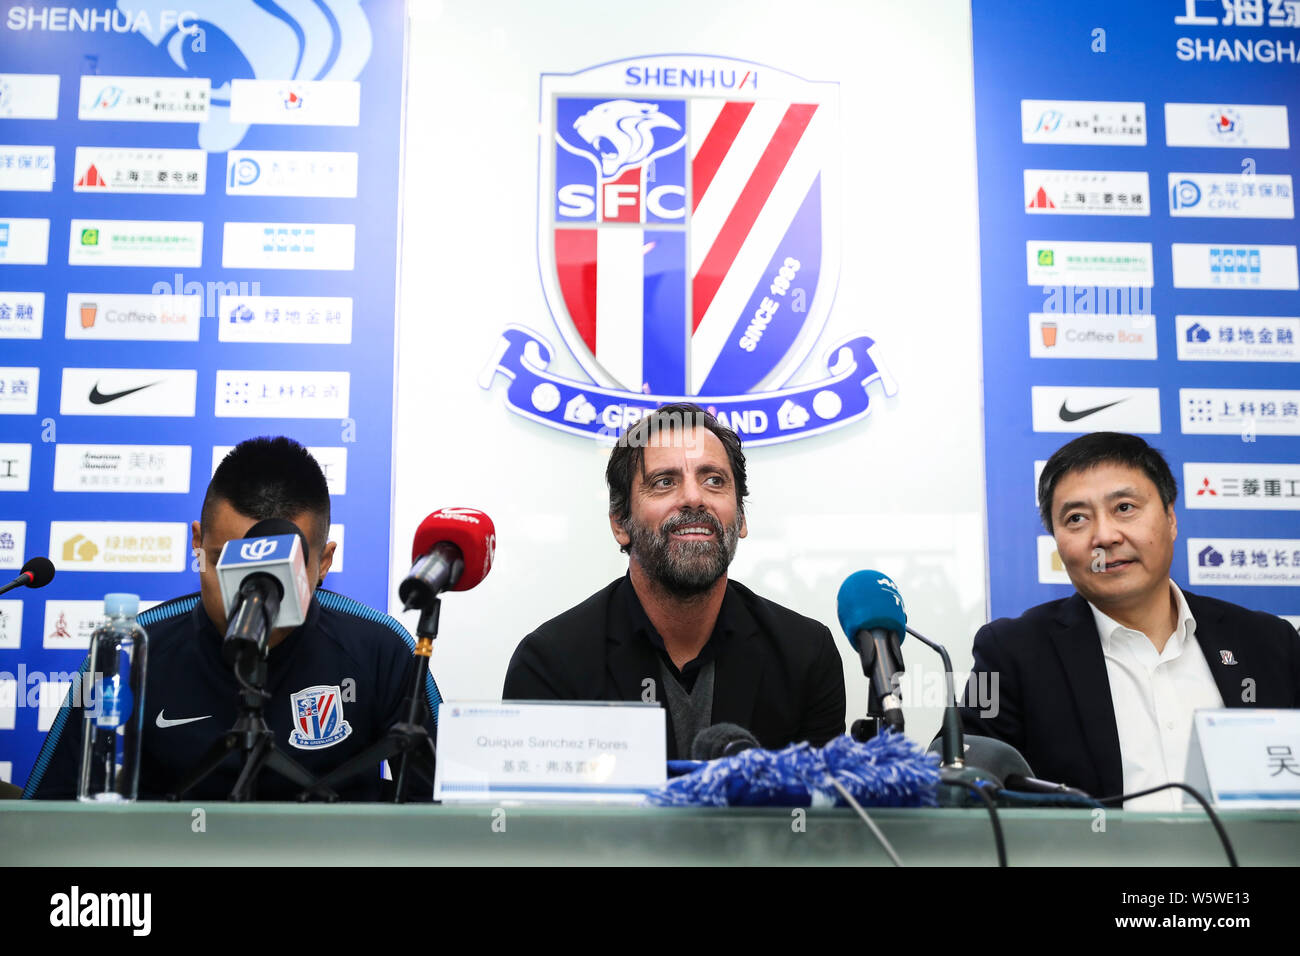 Spanish football manager Quique Sanchez Flores, center, the new head coach of Shanghai Greenland Shenhua FC, attends a press conference in Shanghai, C Stock Photo